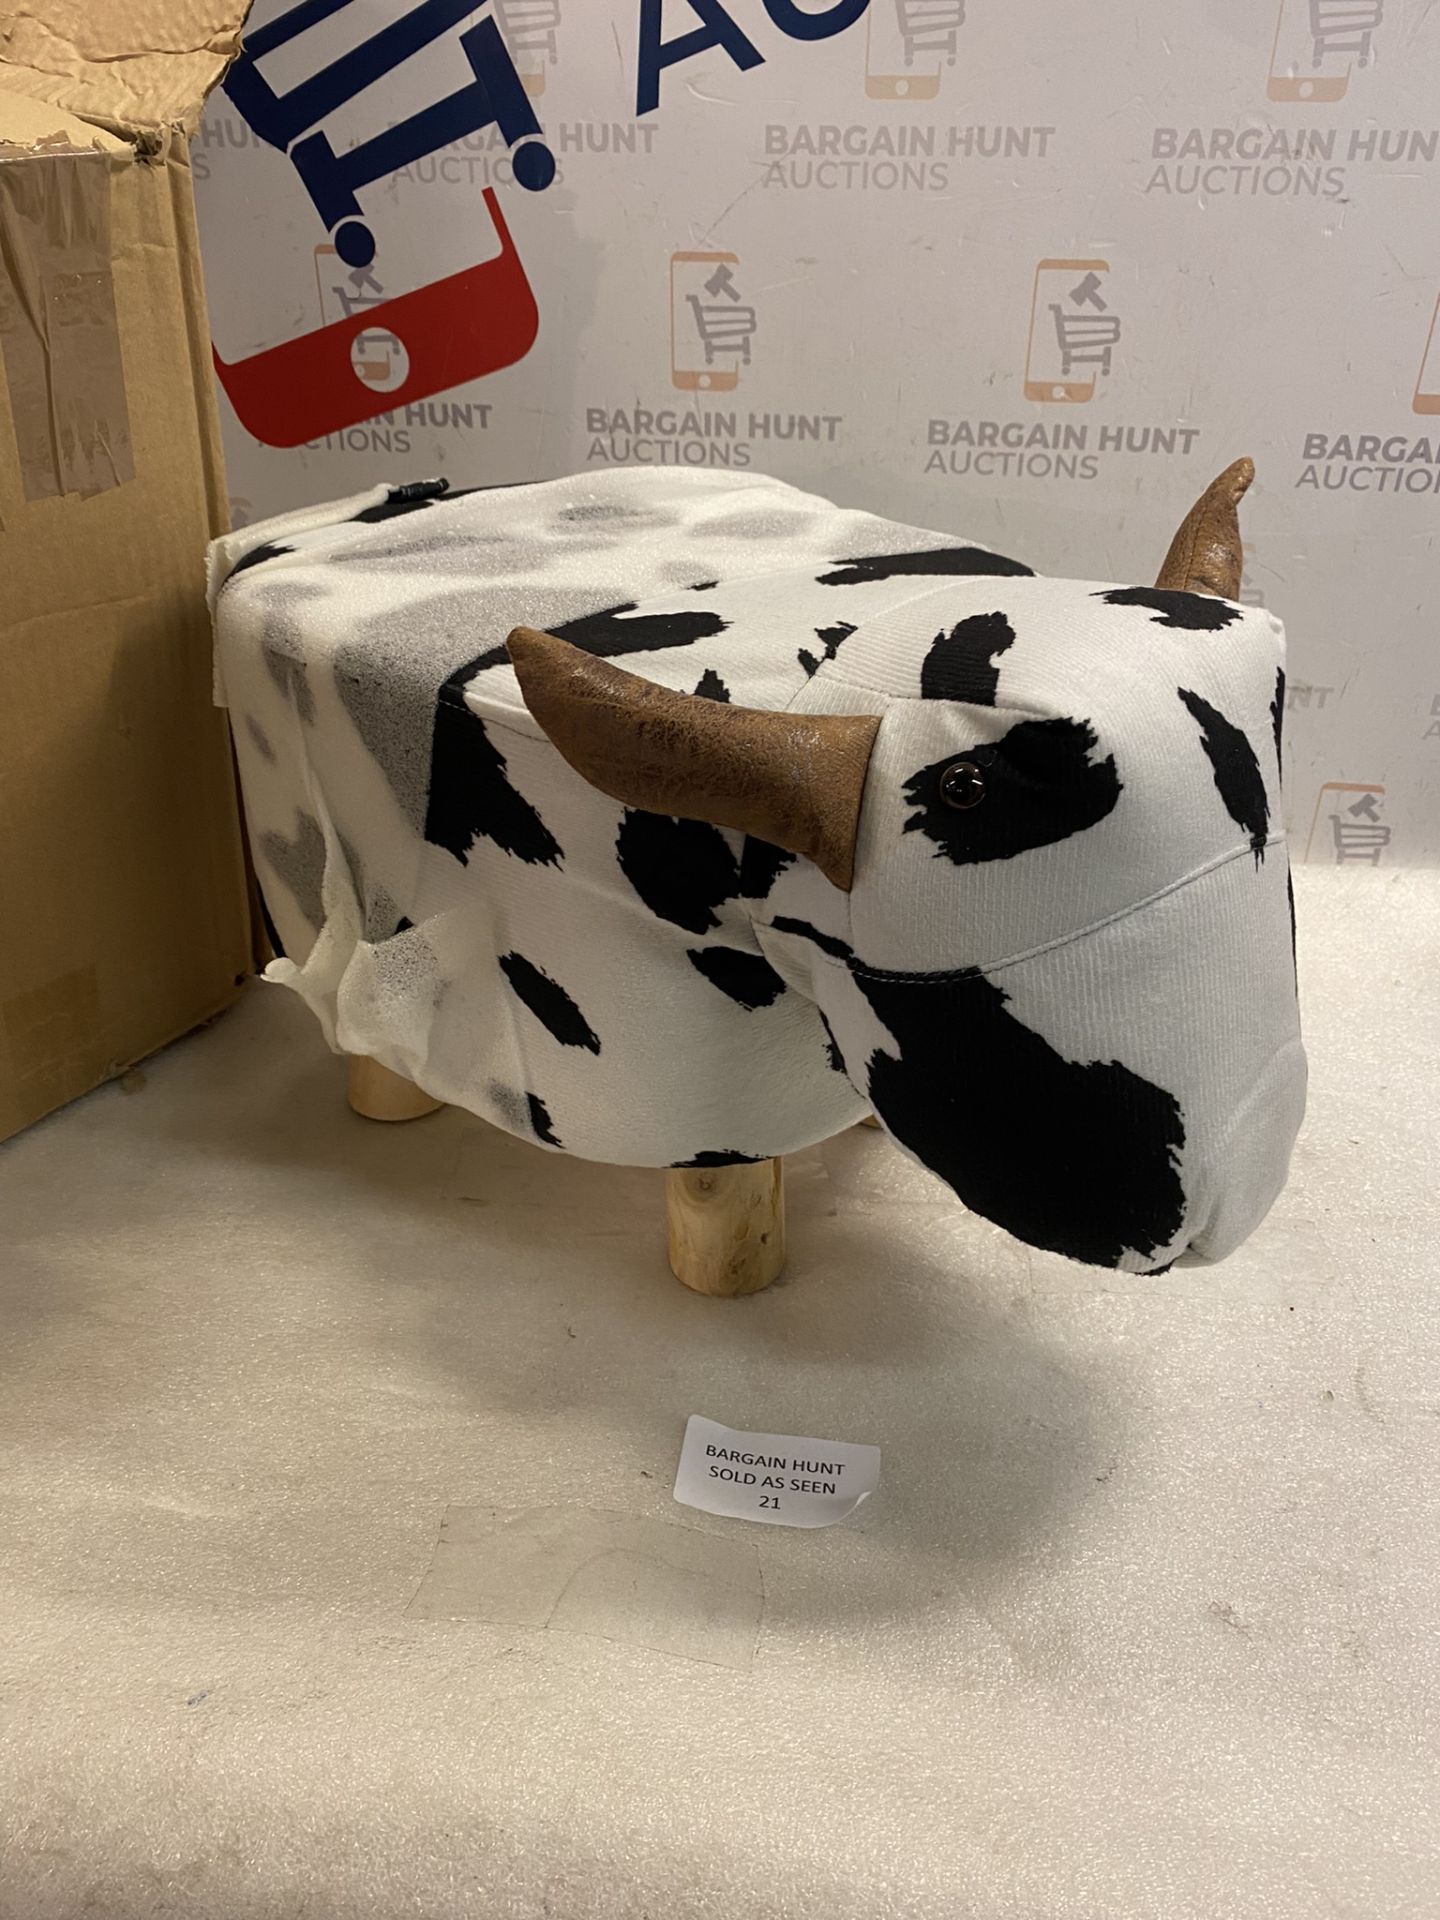 RRP £25.99 Avos-Deals-Global - Black & White Cow Shaped Footstool, Upholstered Ottoman Footrest - Image 2 of 2